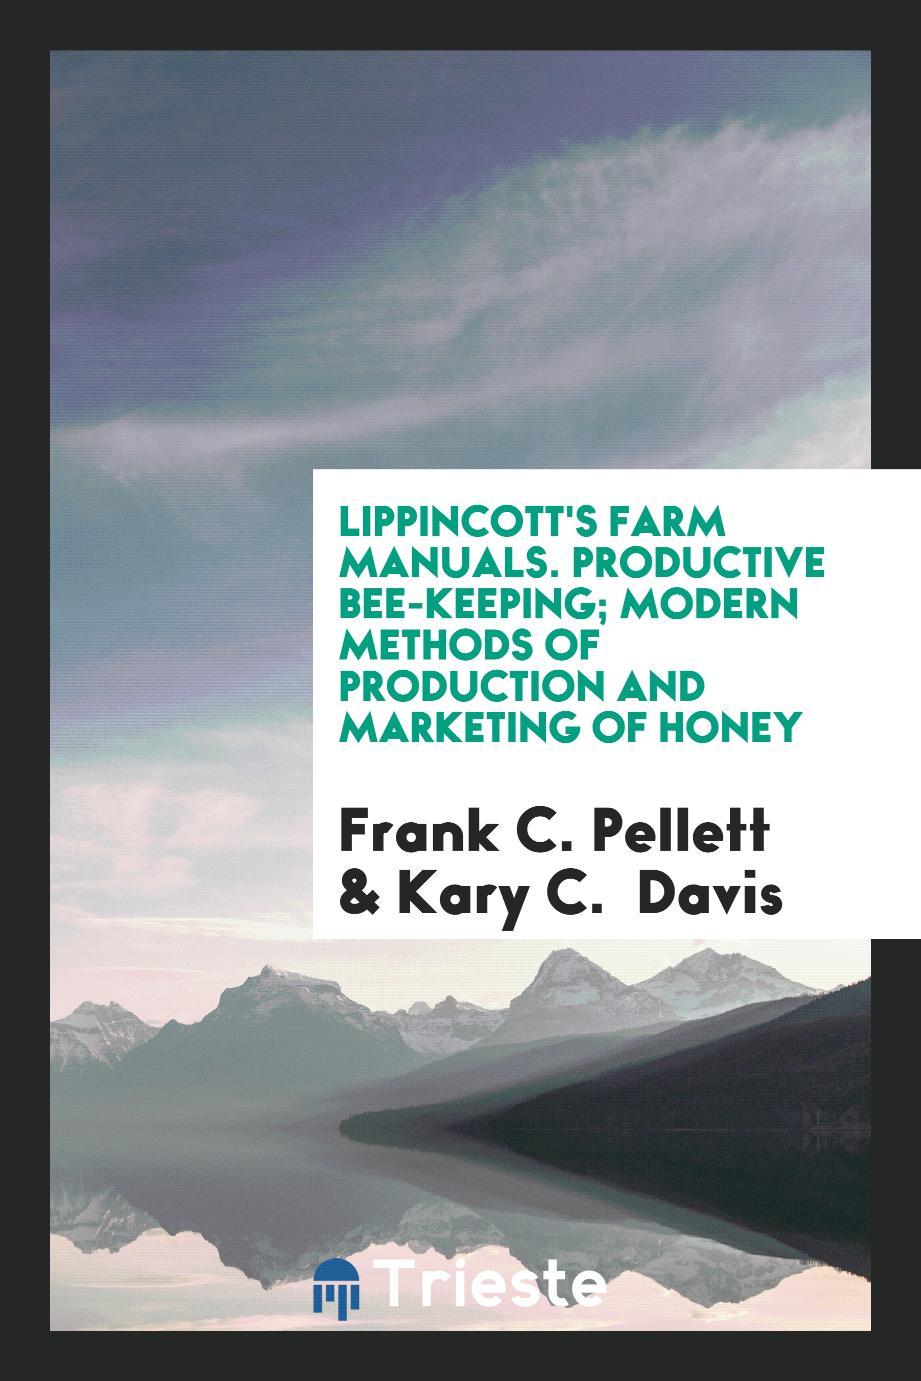 Lippincott's Farm Manuals. Productive Bee-Keeping; Modern Methods of Production and Marketing of Honey